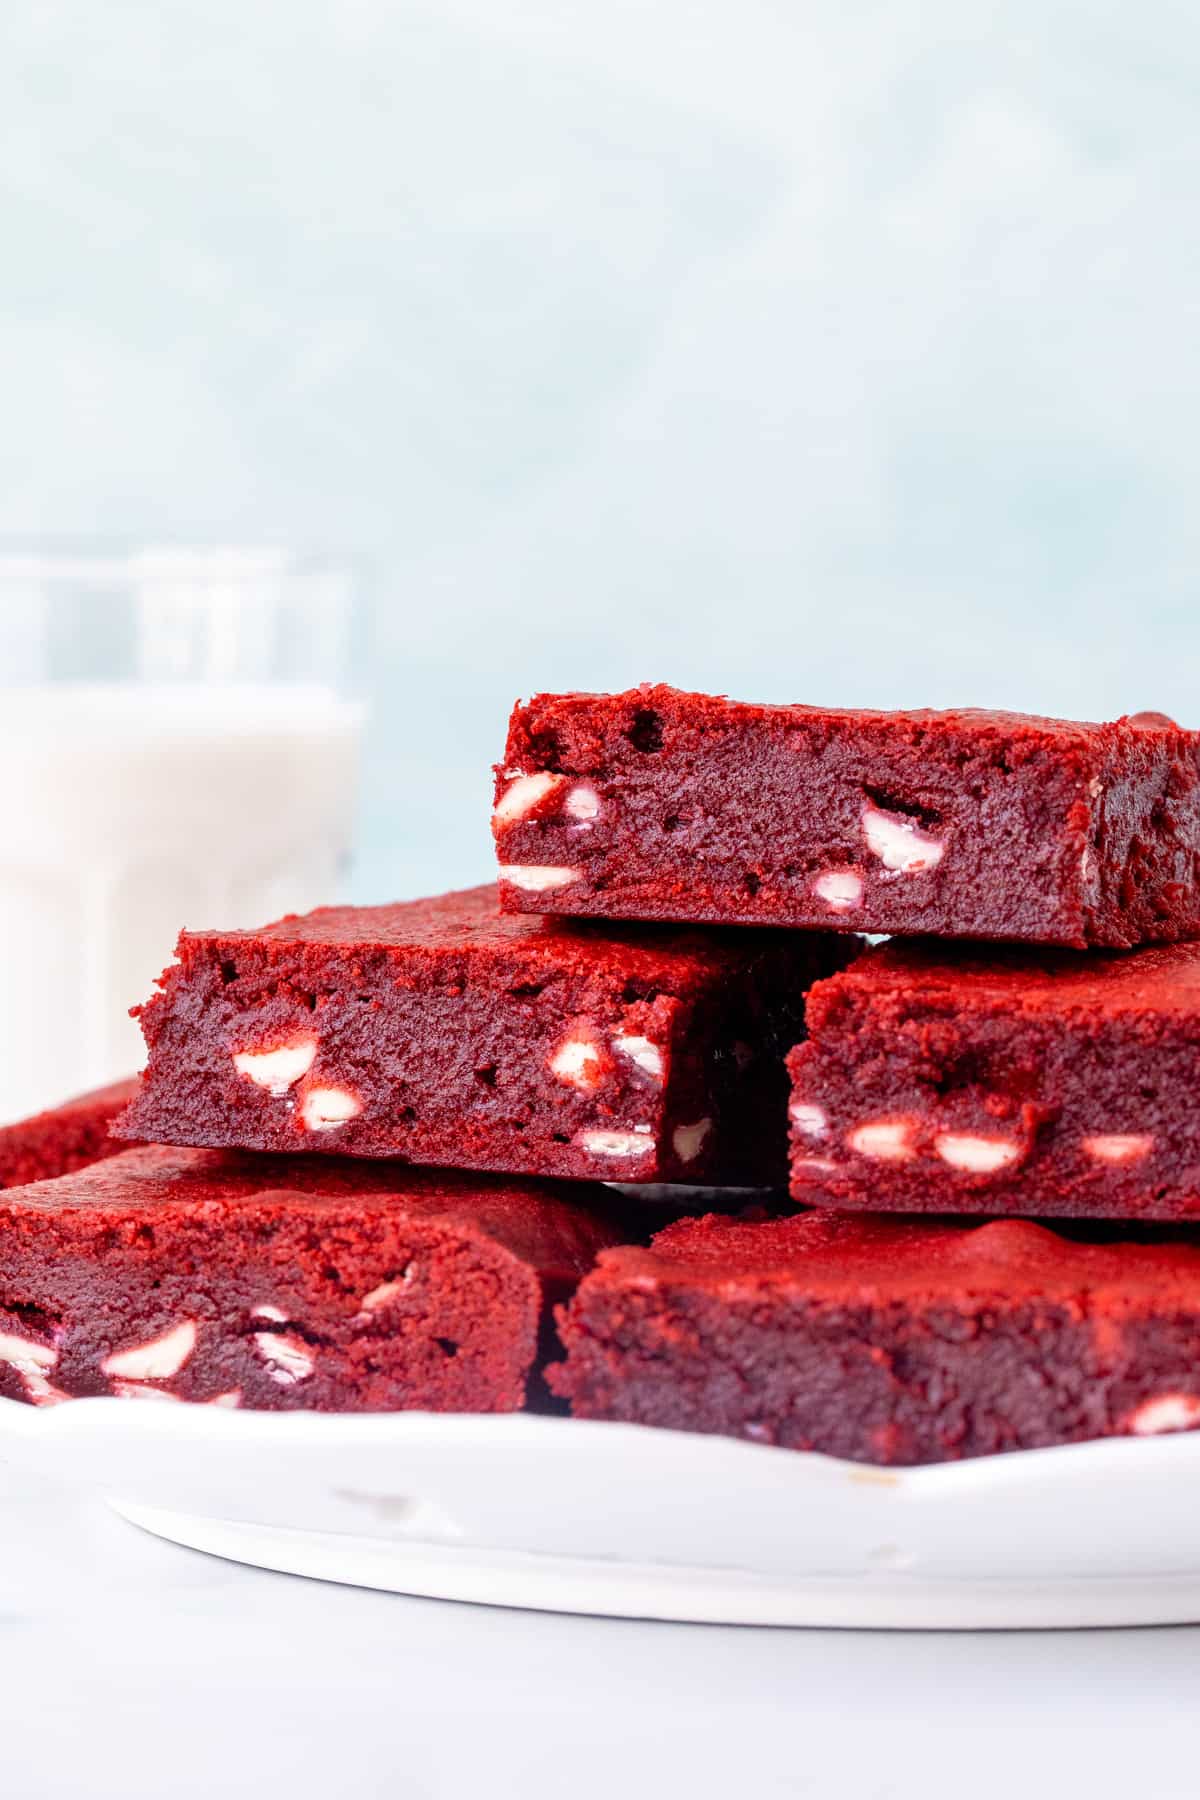 Plate of red velvet brownies filled with white chocolate chips